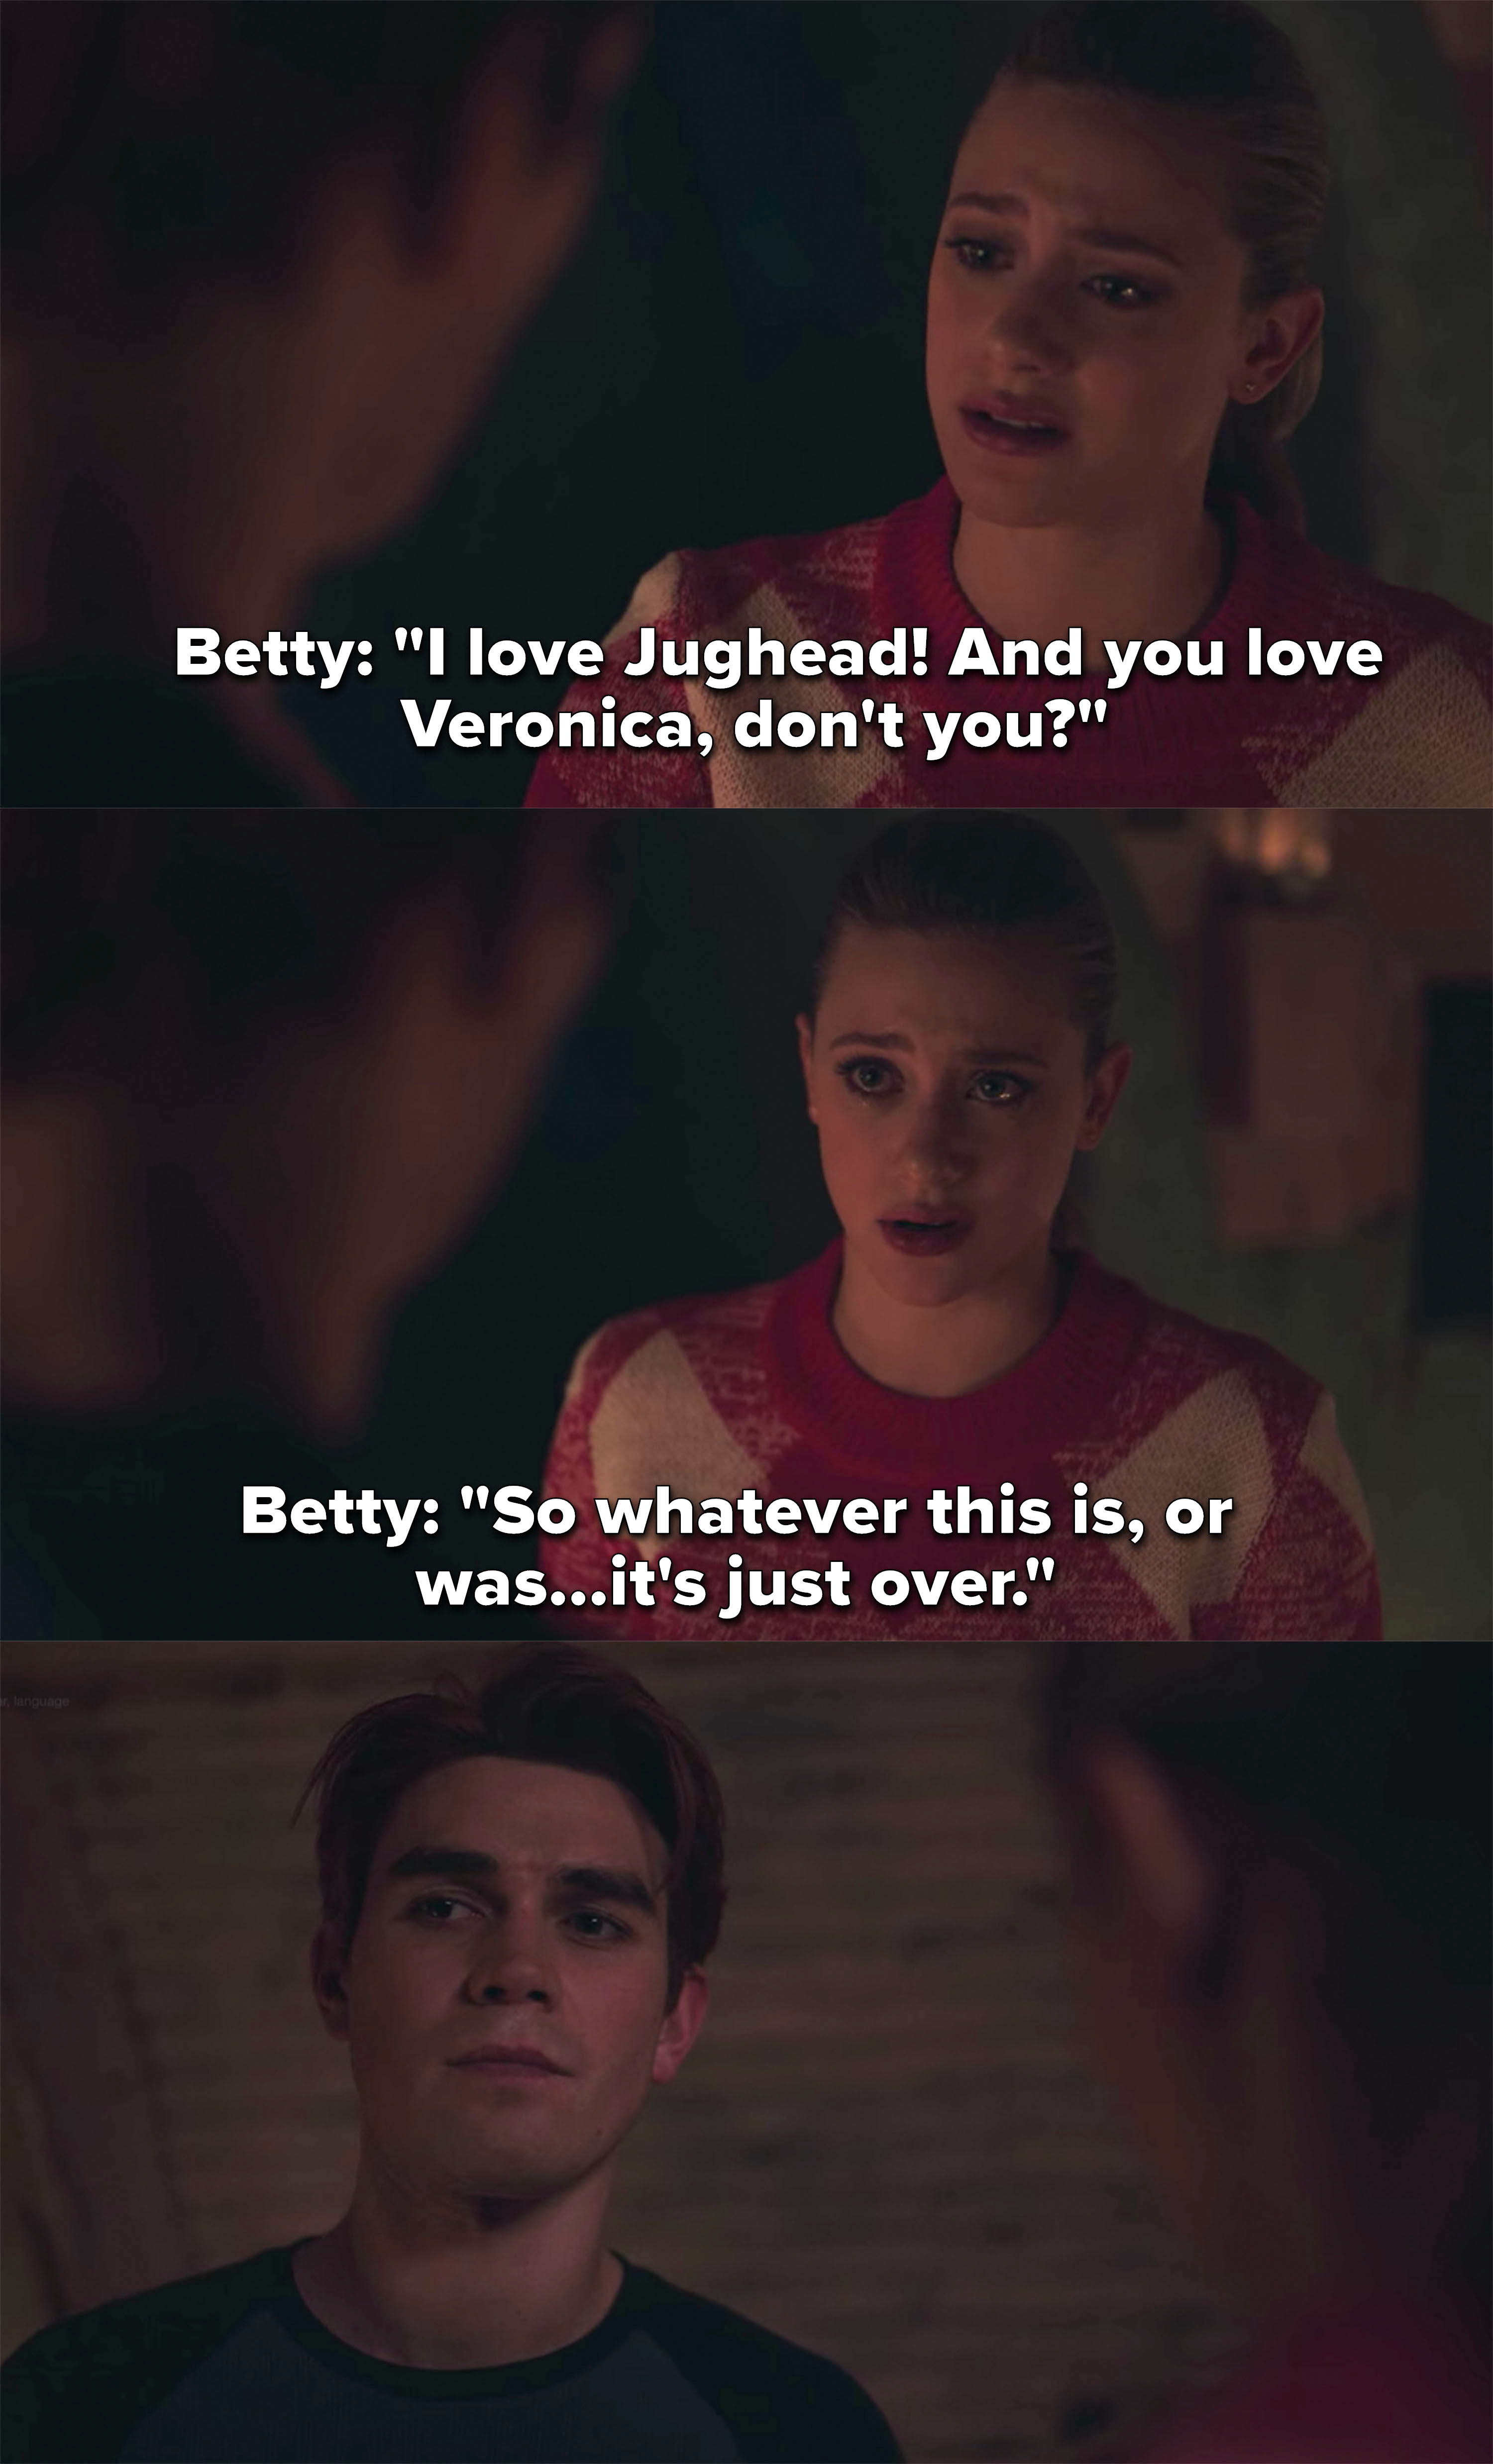 Betty tells Archie she loves Jughead and knows he loves Veronica, so it has to end between them